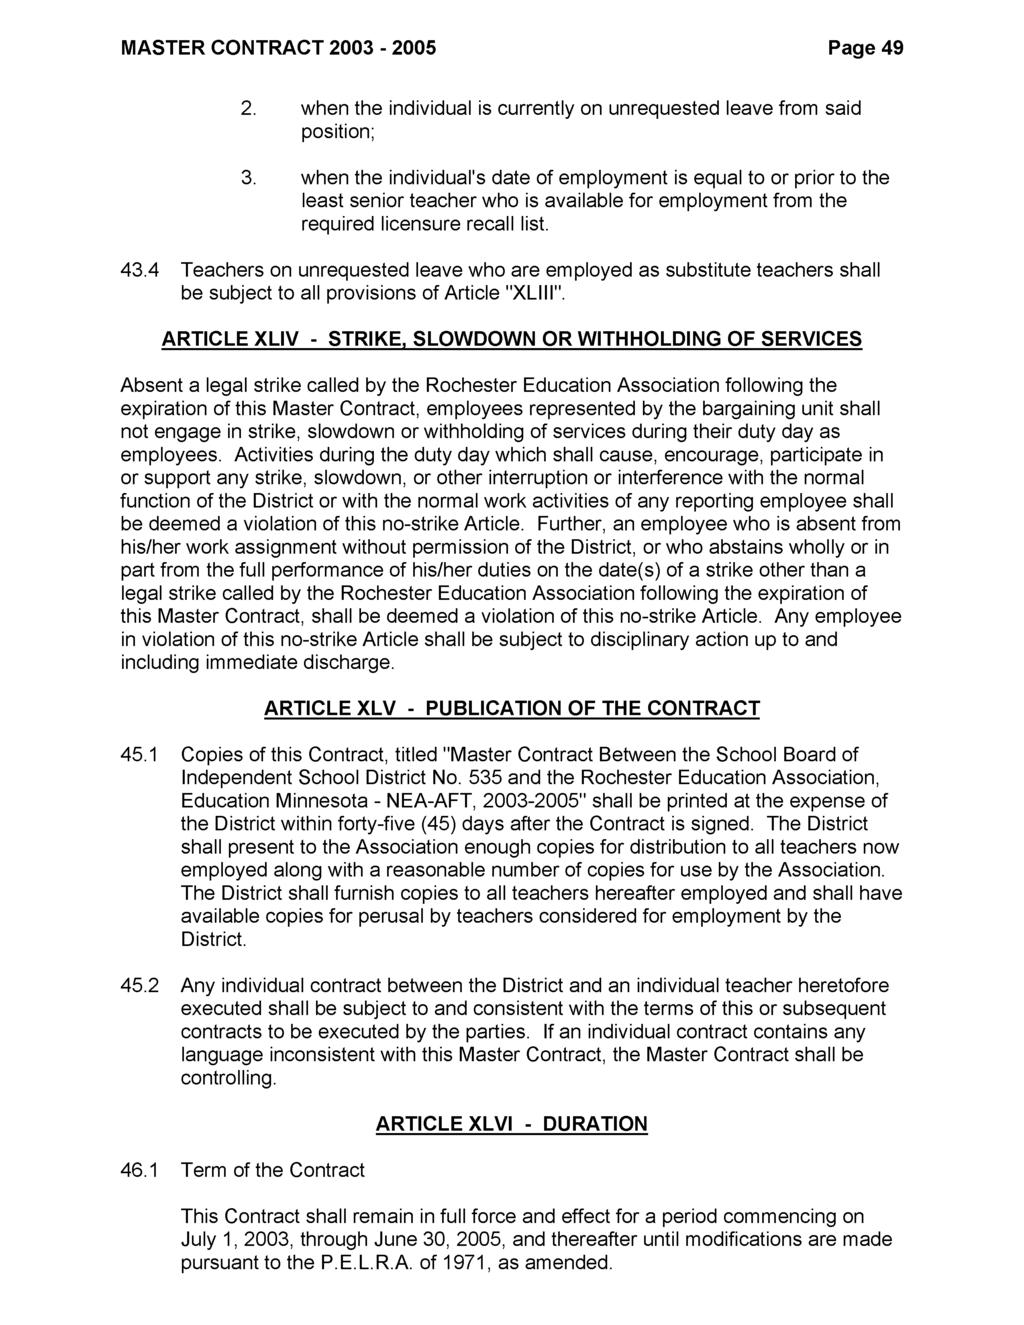 MASTER CONTRACT 2003-2005 Page 49 2. when the individual is currently on unrequested leave from said position; 3.